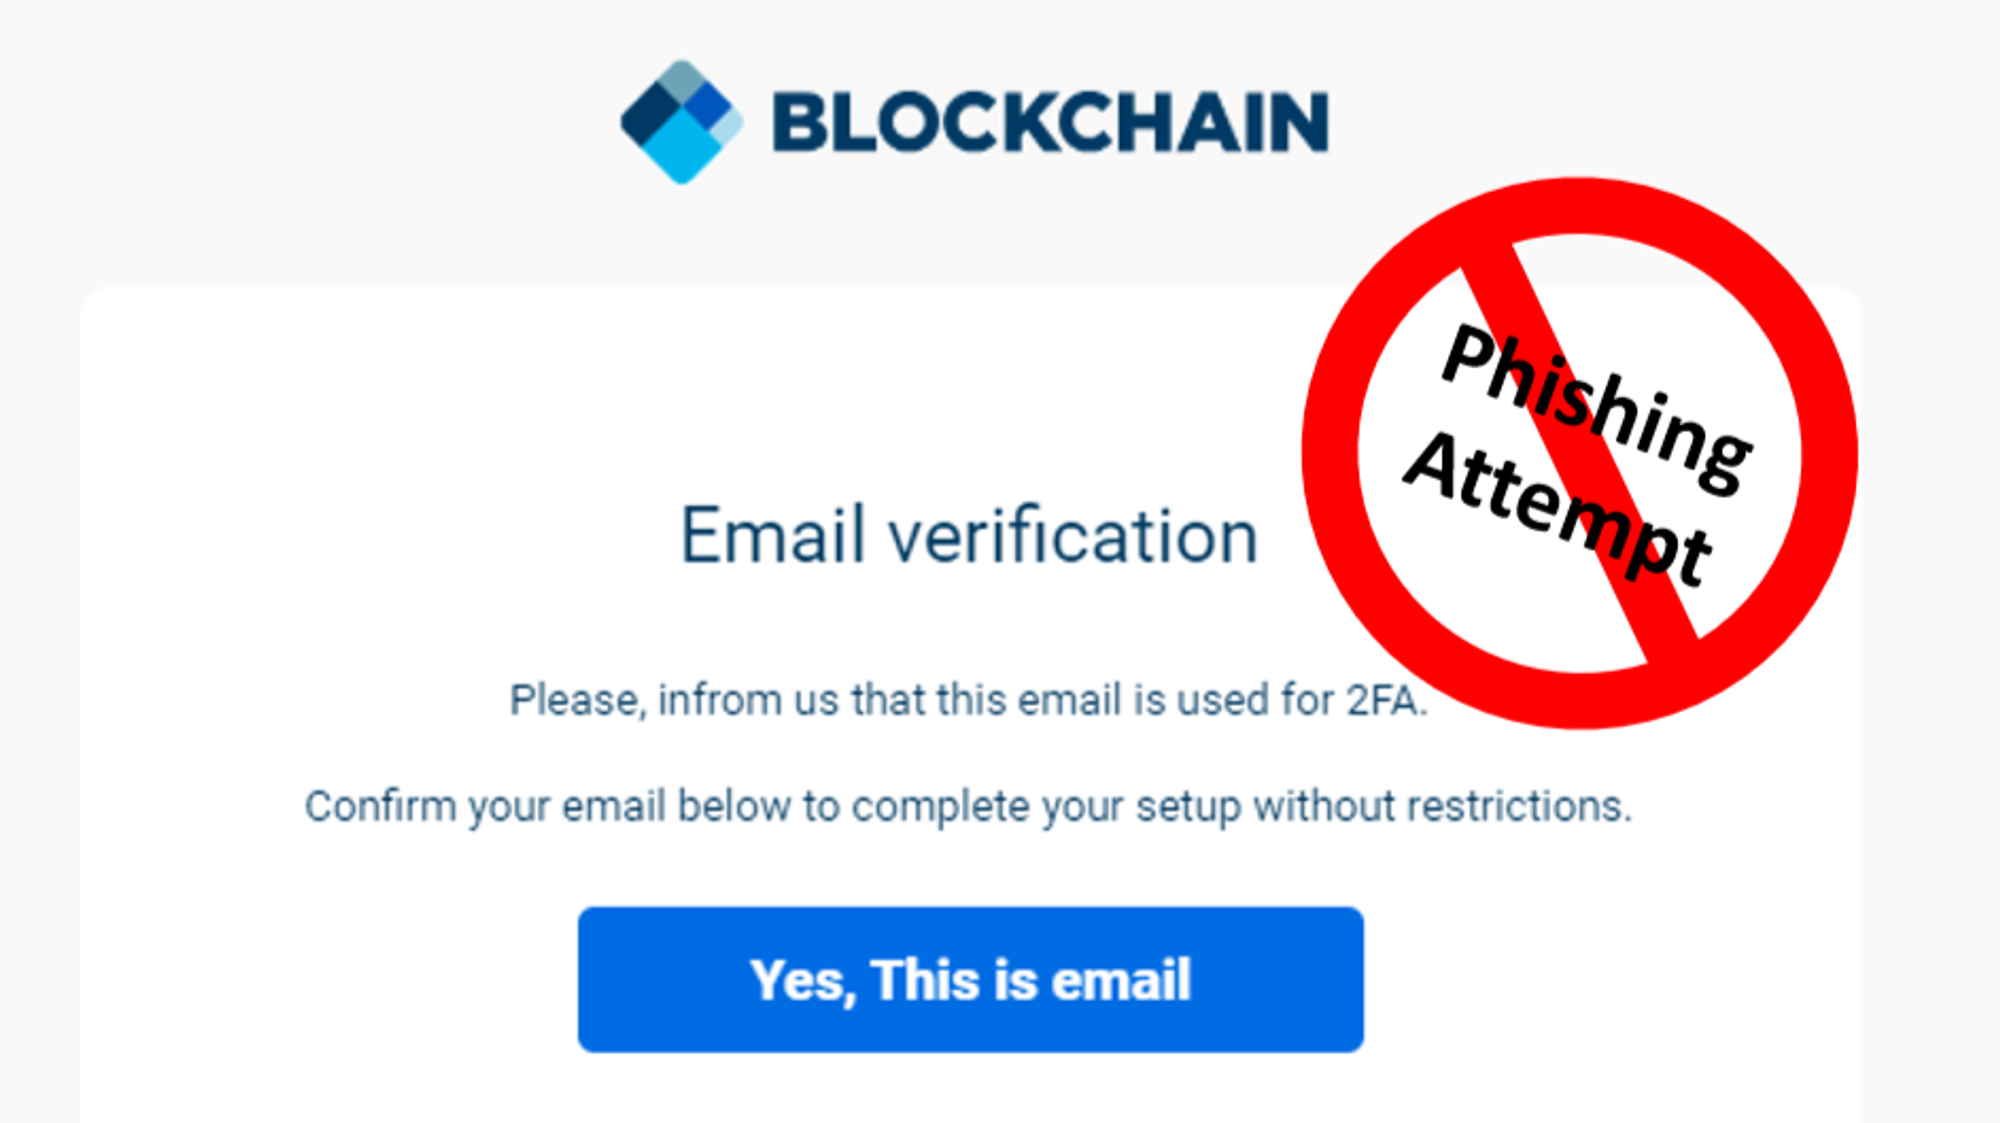 
Requiring the deposit of crypto assets though an email.
Source: https://www.publish0x.com/ghumat-trading/phishing-email-scam-spotting-red-flags-xrqzdm